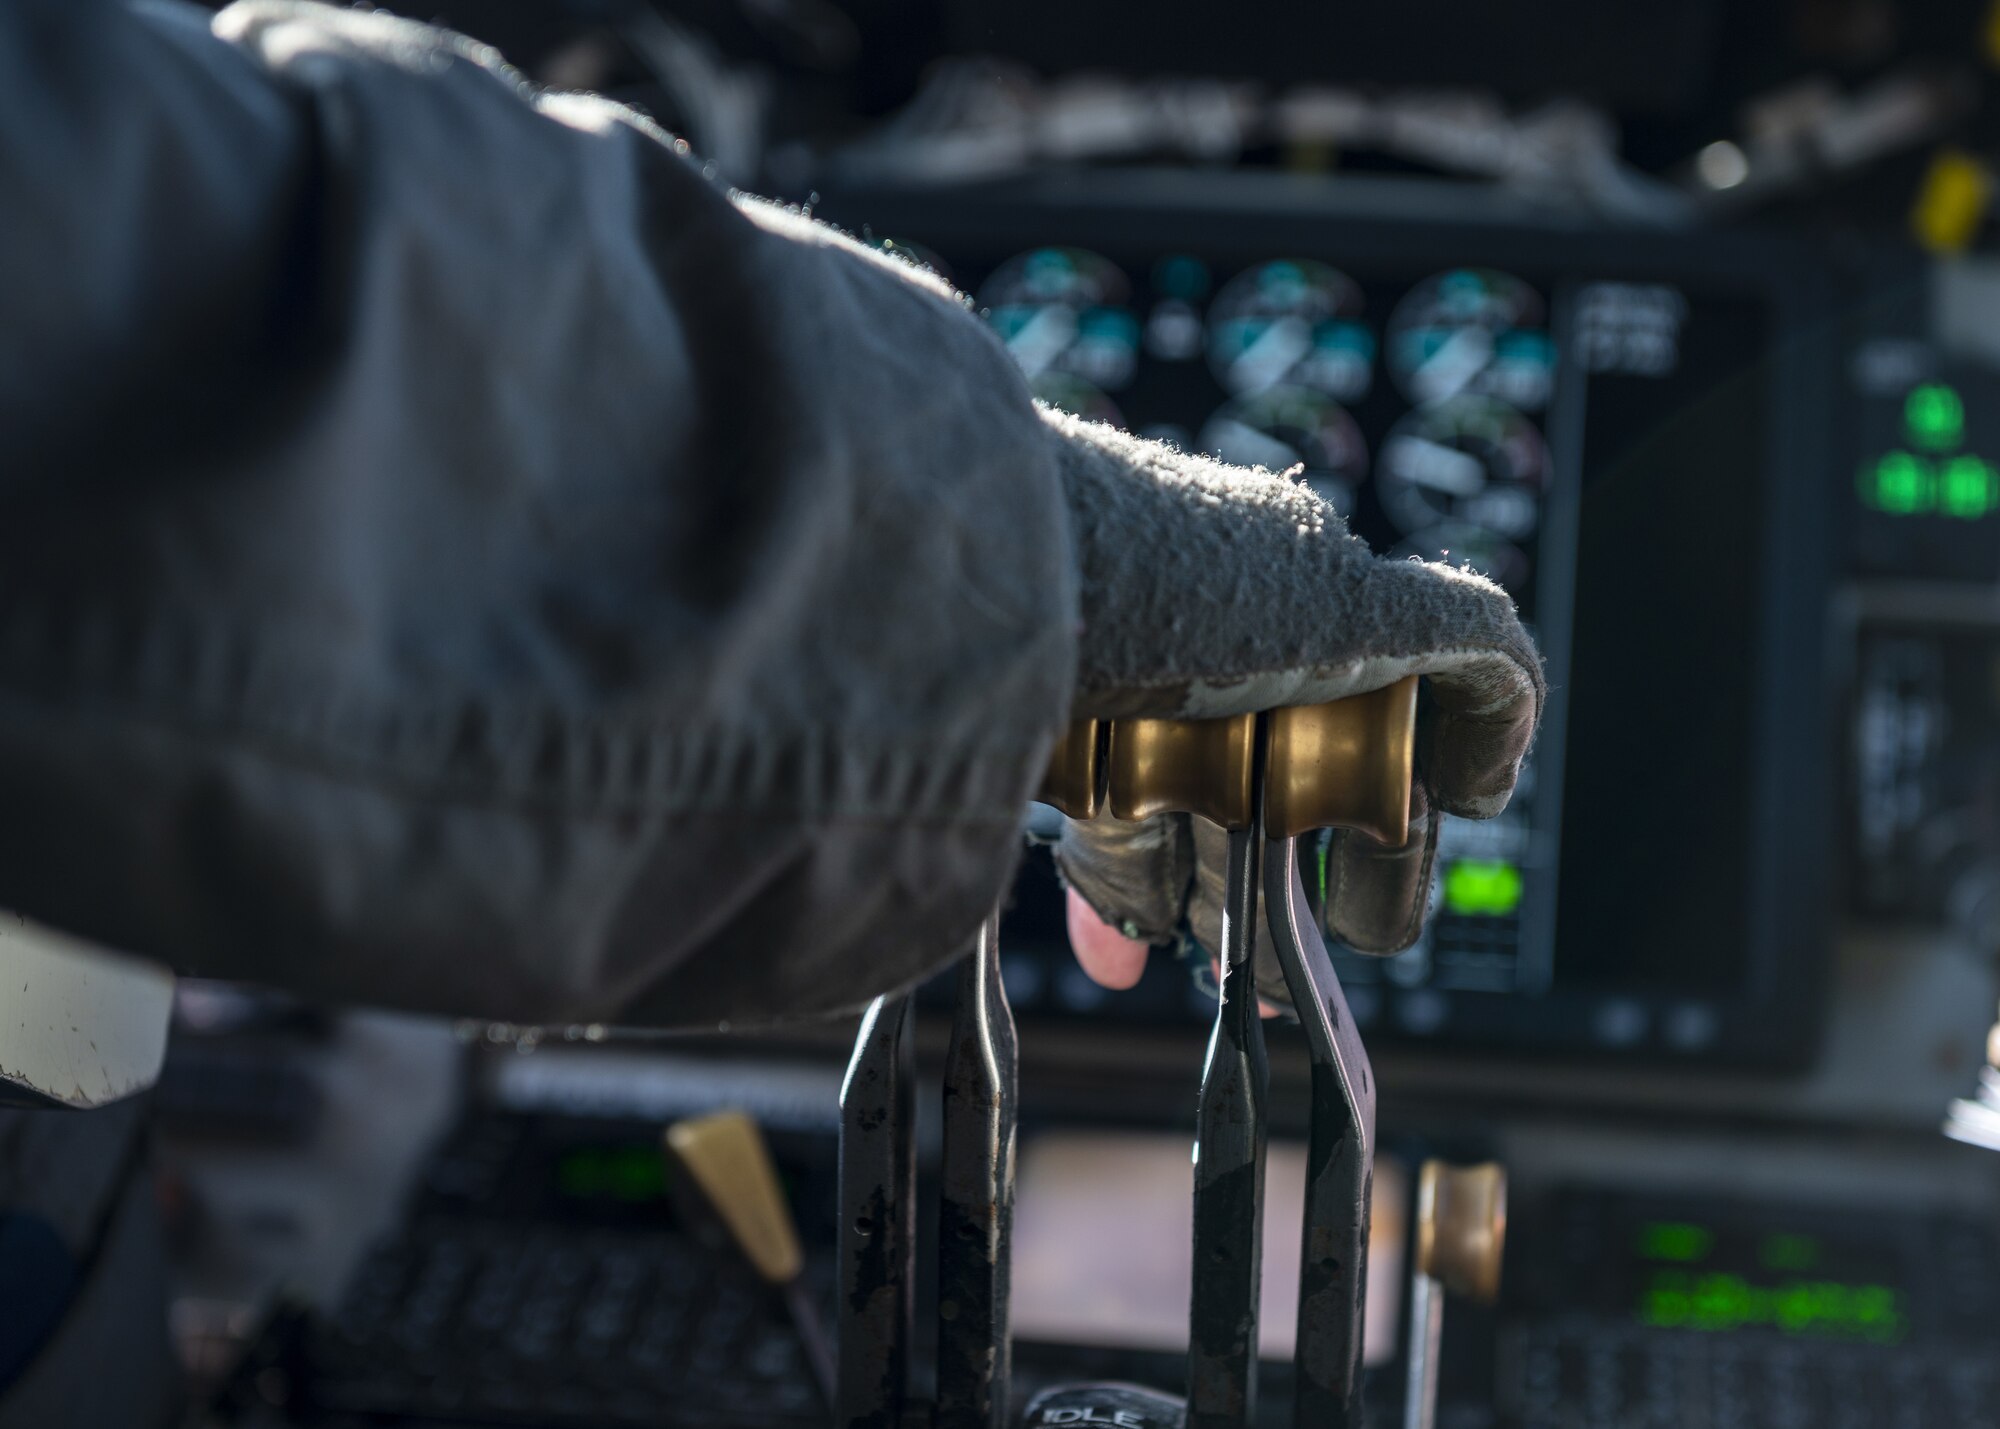 U.S. Air Force Capt. Christina Kelvin, 384th Air Refueling Squadron pilot, flies a KC-135 Stratotanker en route to Eielson Air Force Base, Alaska, March 7, 2023. Aircrew from the 384th Air Refueling Squadron conducted an air refueling coronet with Marines from the Marine Fighter Attack Squadron 312, demonstrating the critical role mobility forces have in projecting the joint force anywhere, anytime. (U.S. Air Force photo by Staff Sgt. Lawrence Sena)